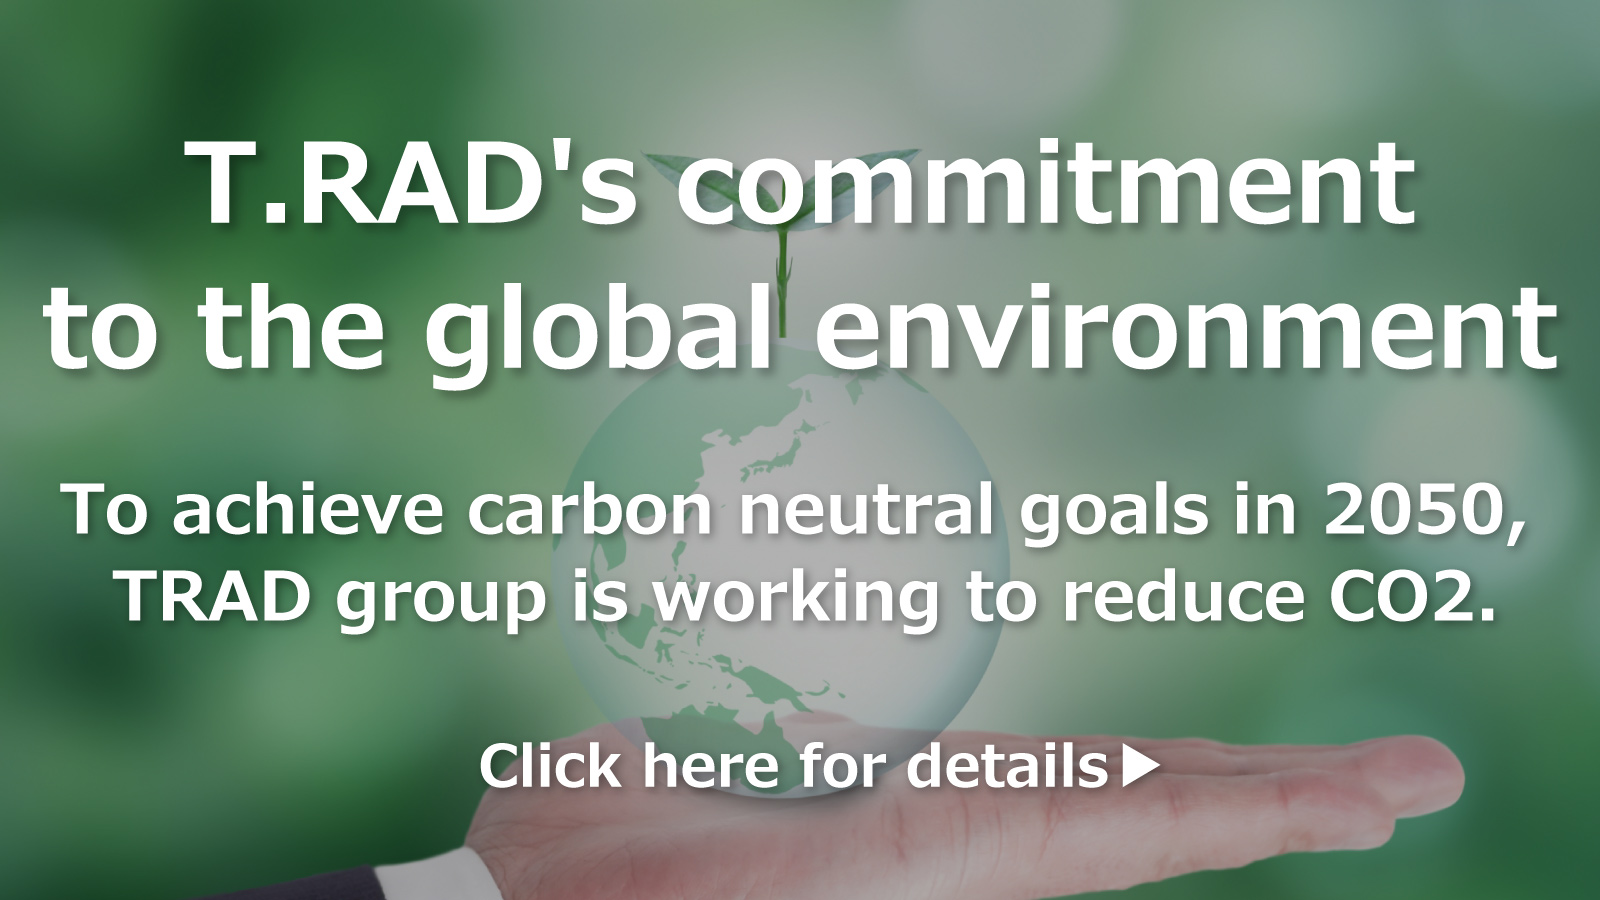 T.RAD's commitment to the global environment